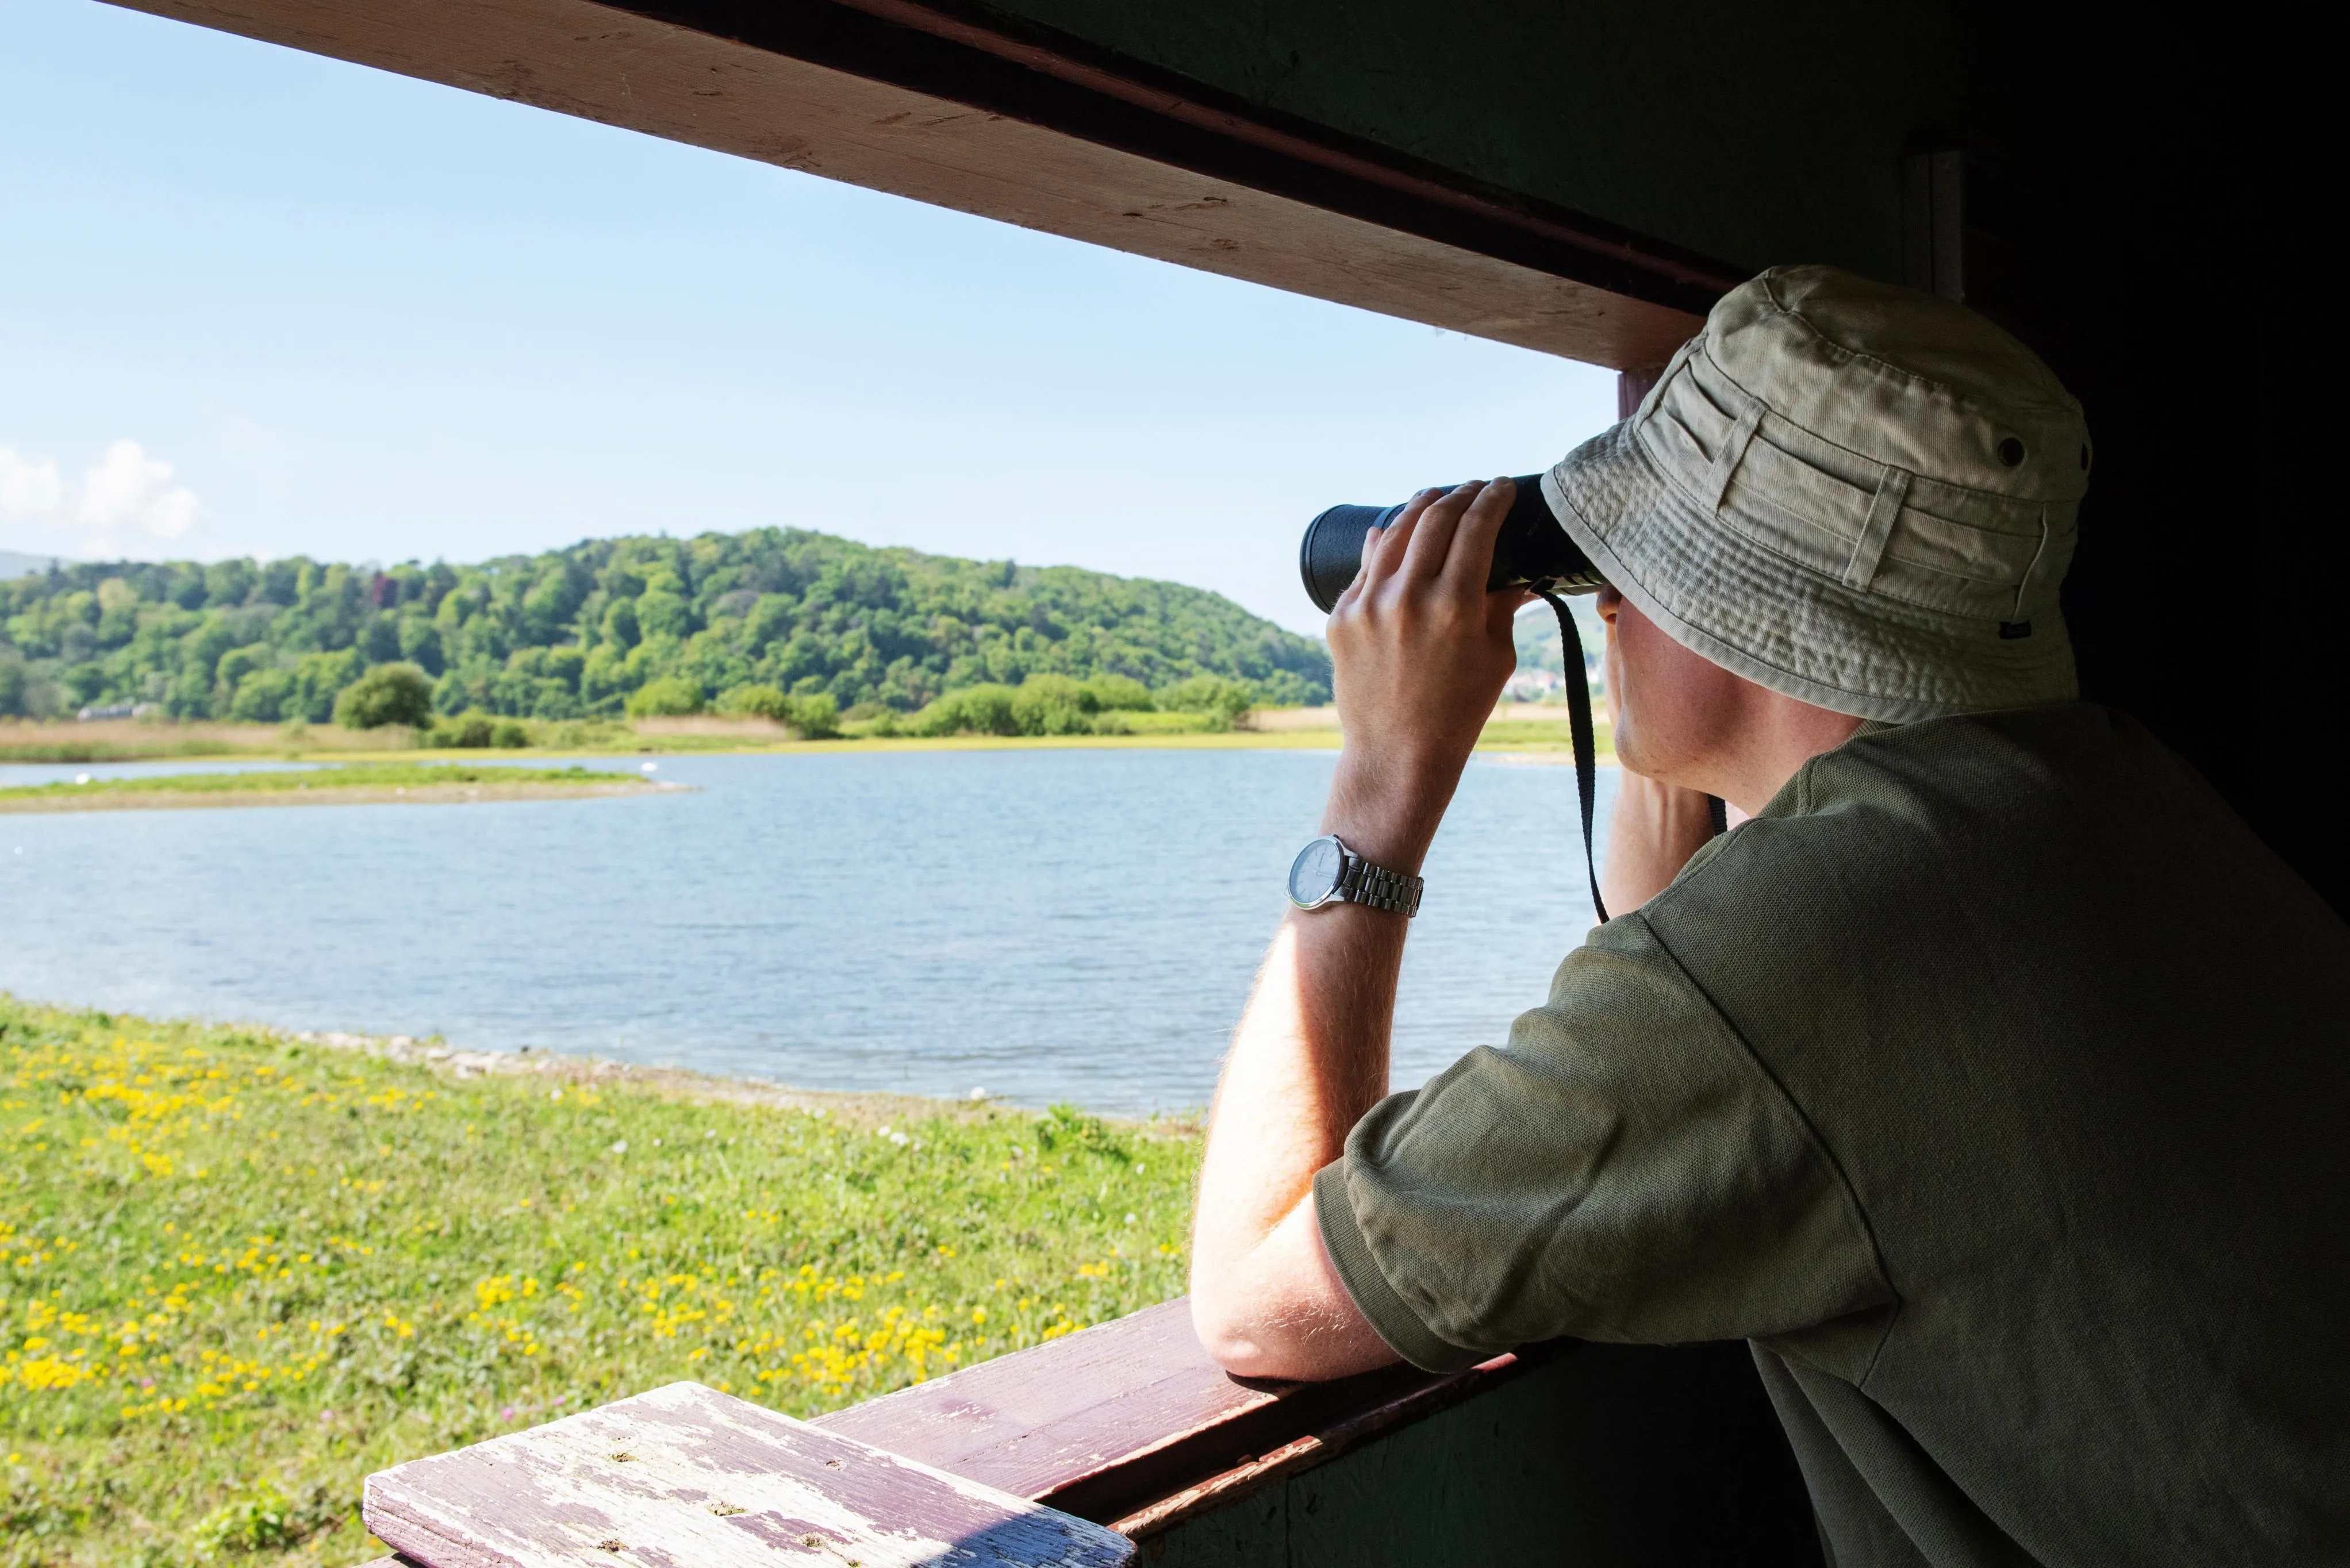 A person in a hide with binoculars looks out to a sunny reserve with a lake.